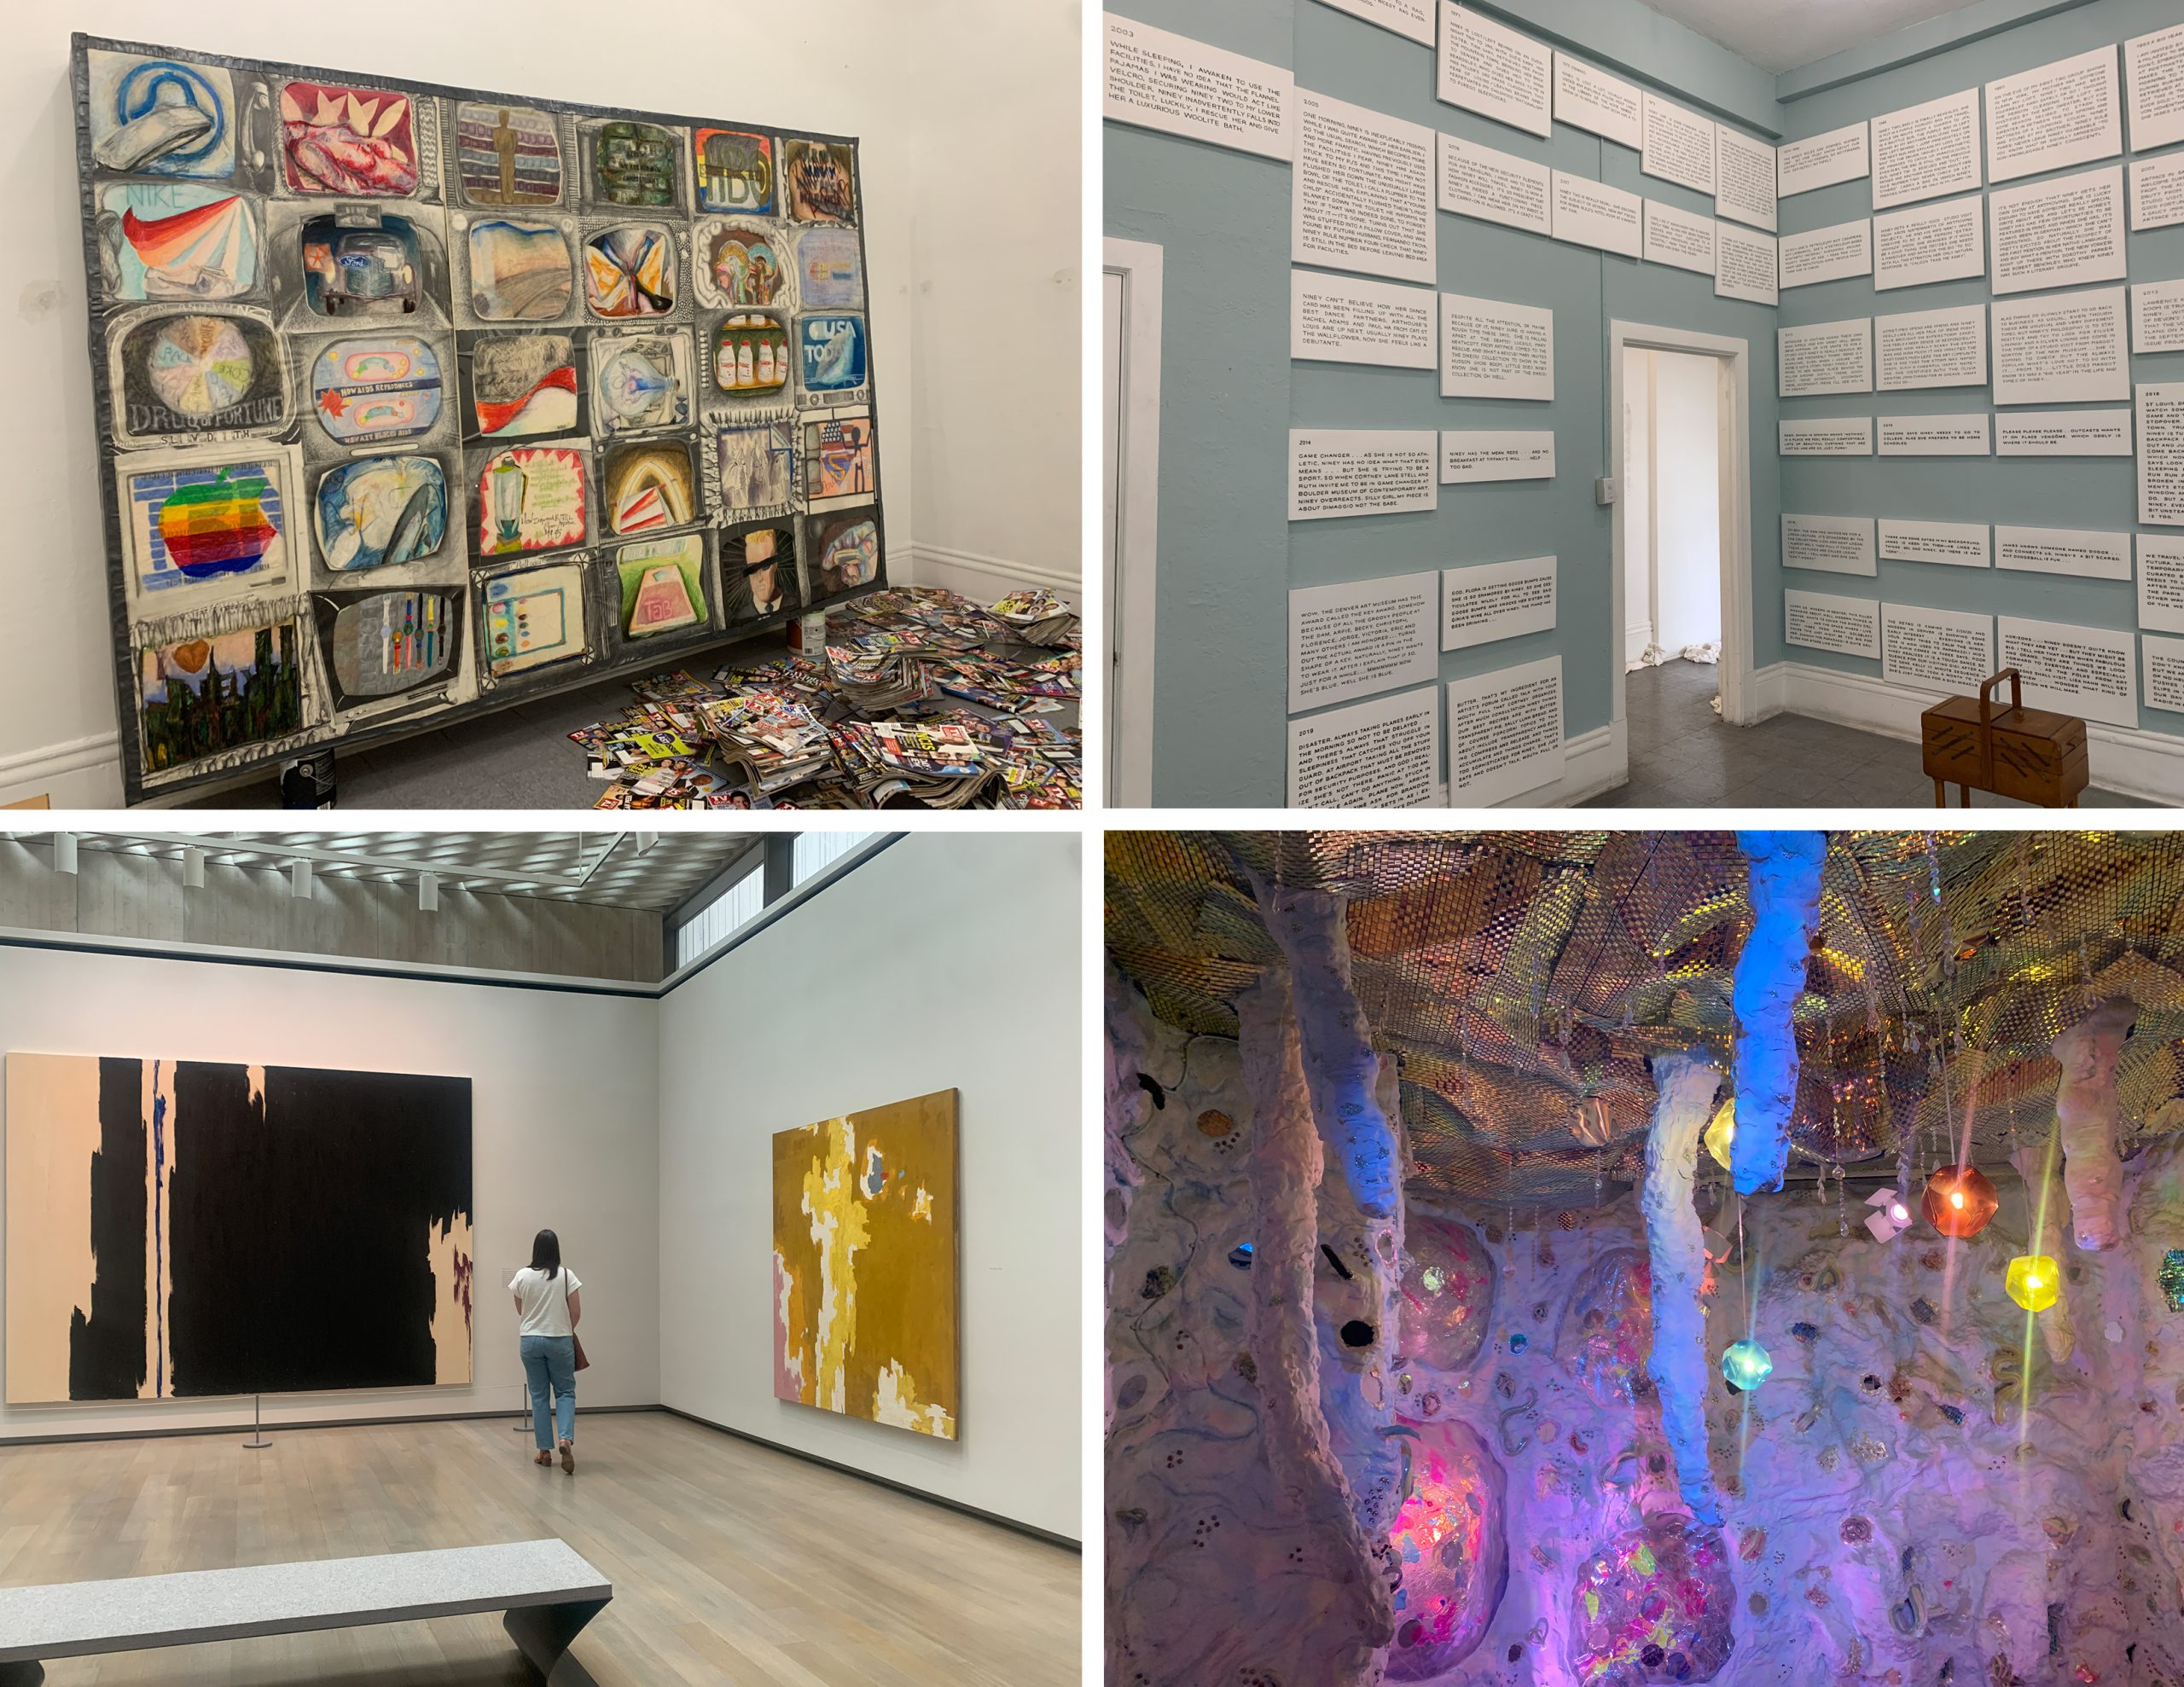 The image is sectioned into four parts. The top left depicts a colorful painting made up of CRT TVs, sitting next to every issue of TV guide. The top right depicts a room lined with paintings floor to ceiling that are filled with text. The bottom left image shows a gallery space at the Clyfford Still Museum, and the bottom right image depicts an immersive installation made to look like a cave with gemstones at Meow Wolf. 